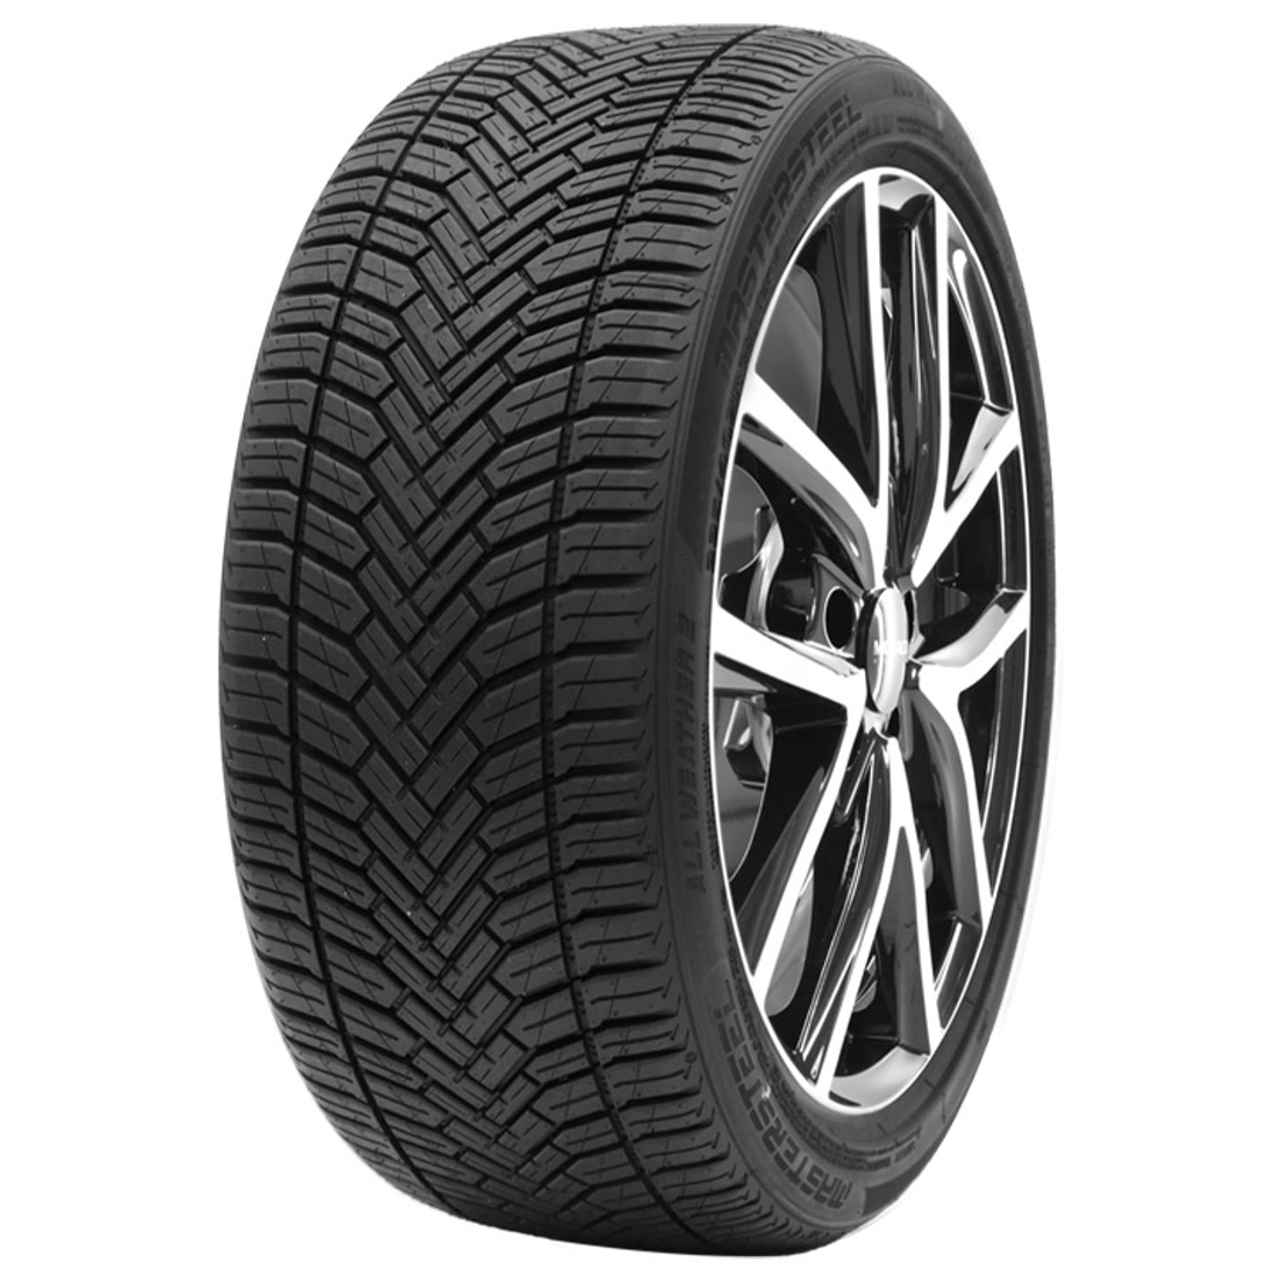 MASTERSTEEL ALL WEATHER 2 195/55R16 87H BSW